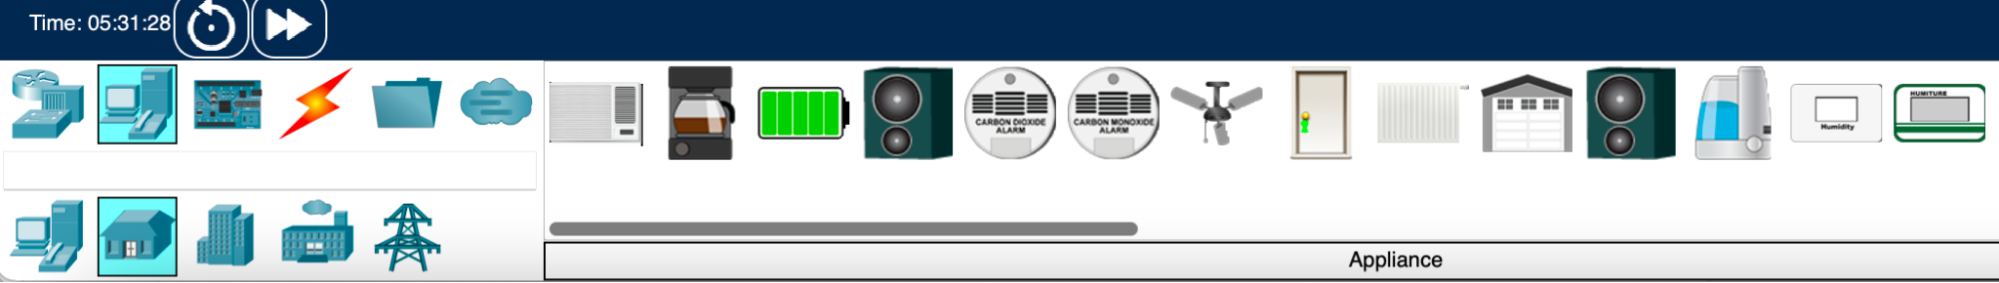 Screenshot of the end devices icons available from the Home menu in Cisco Packet Tracer